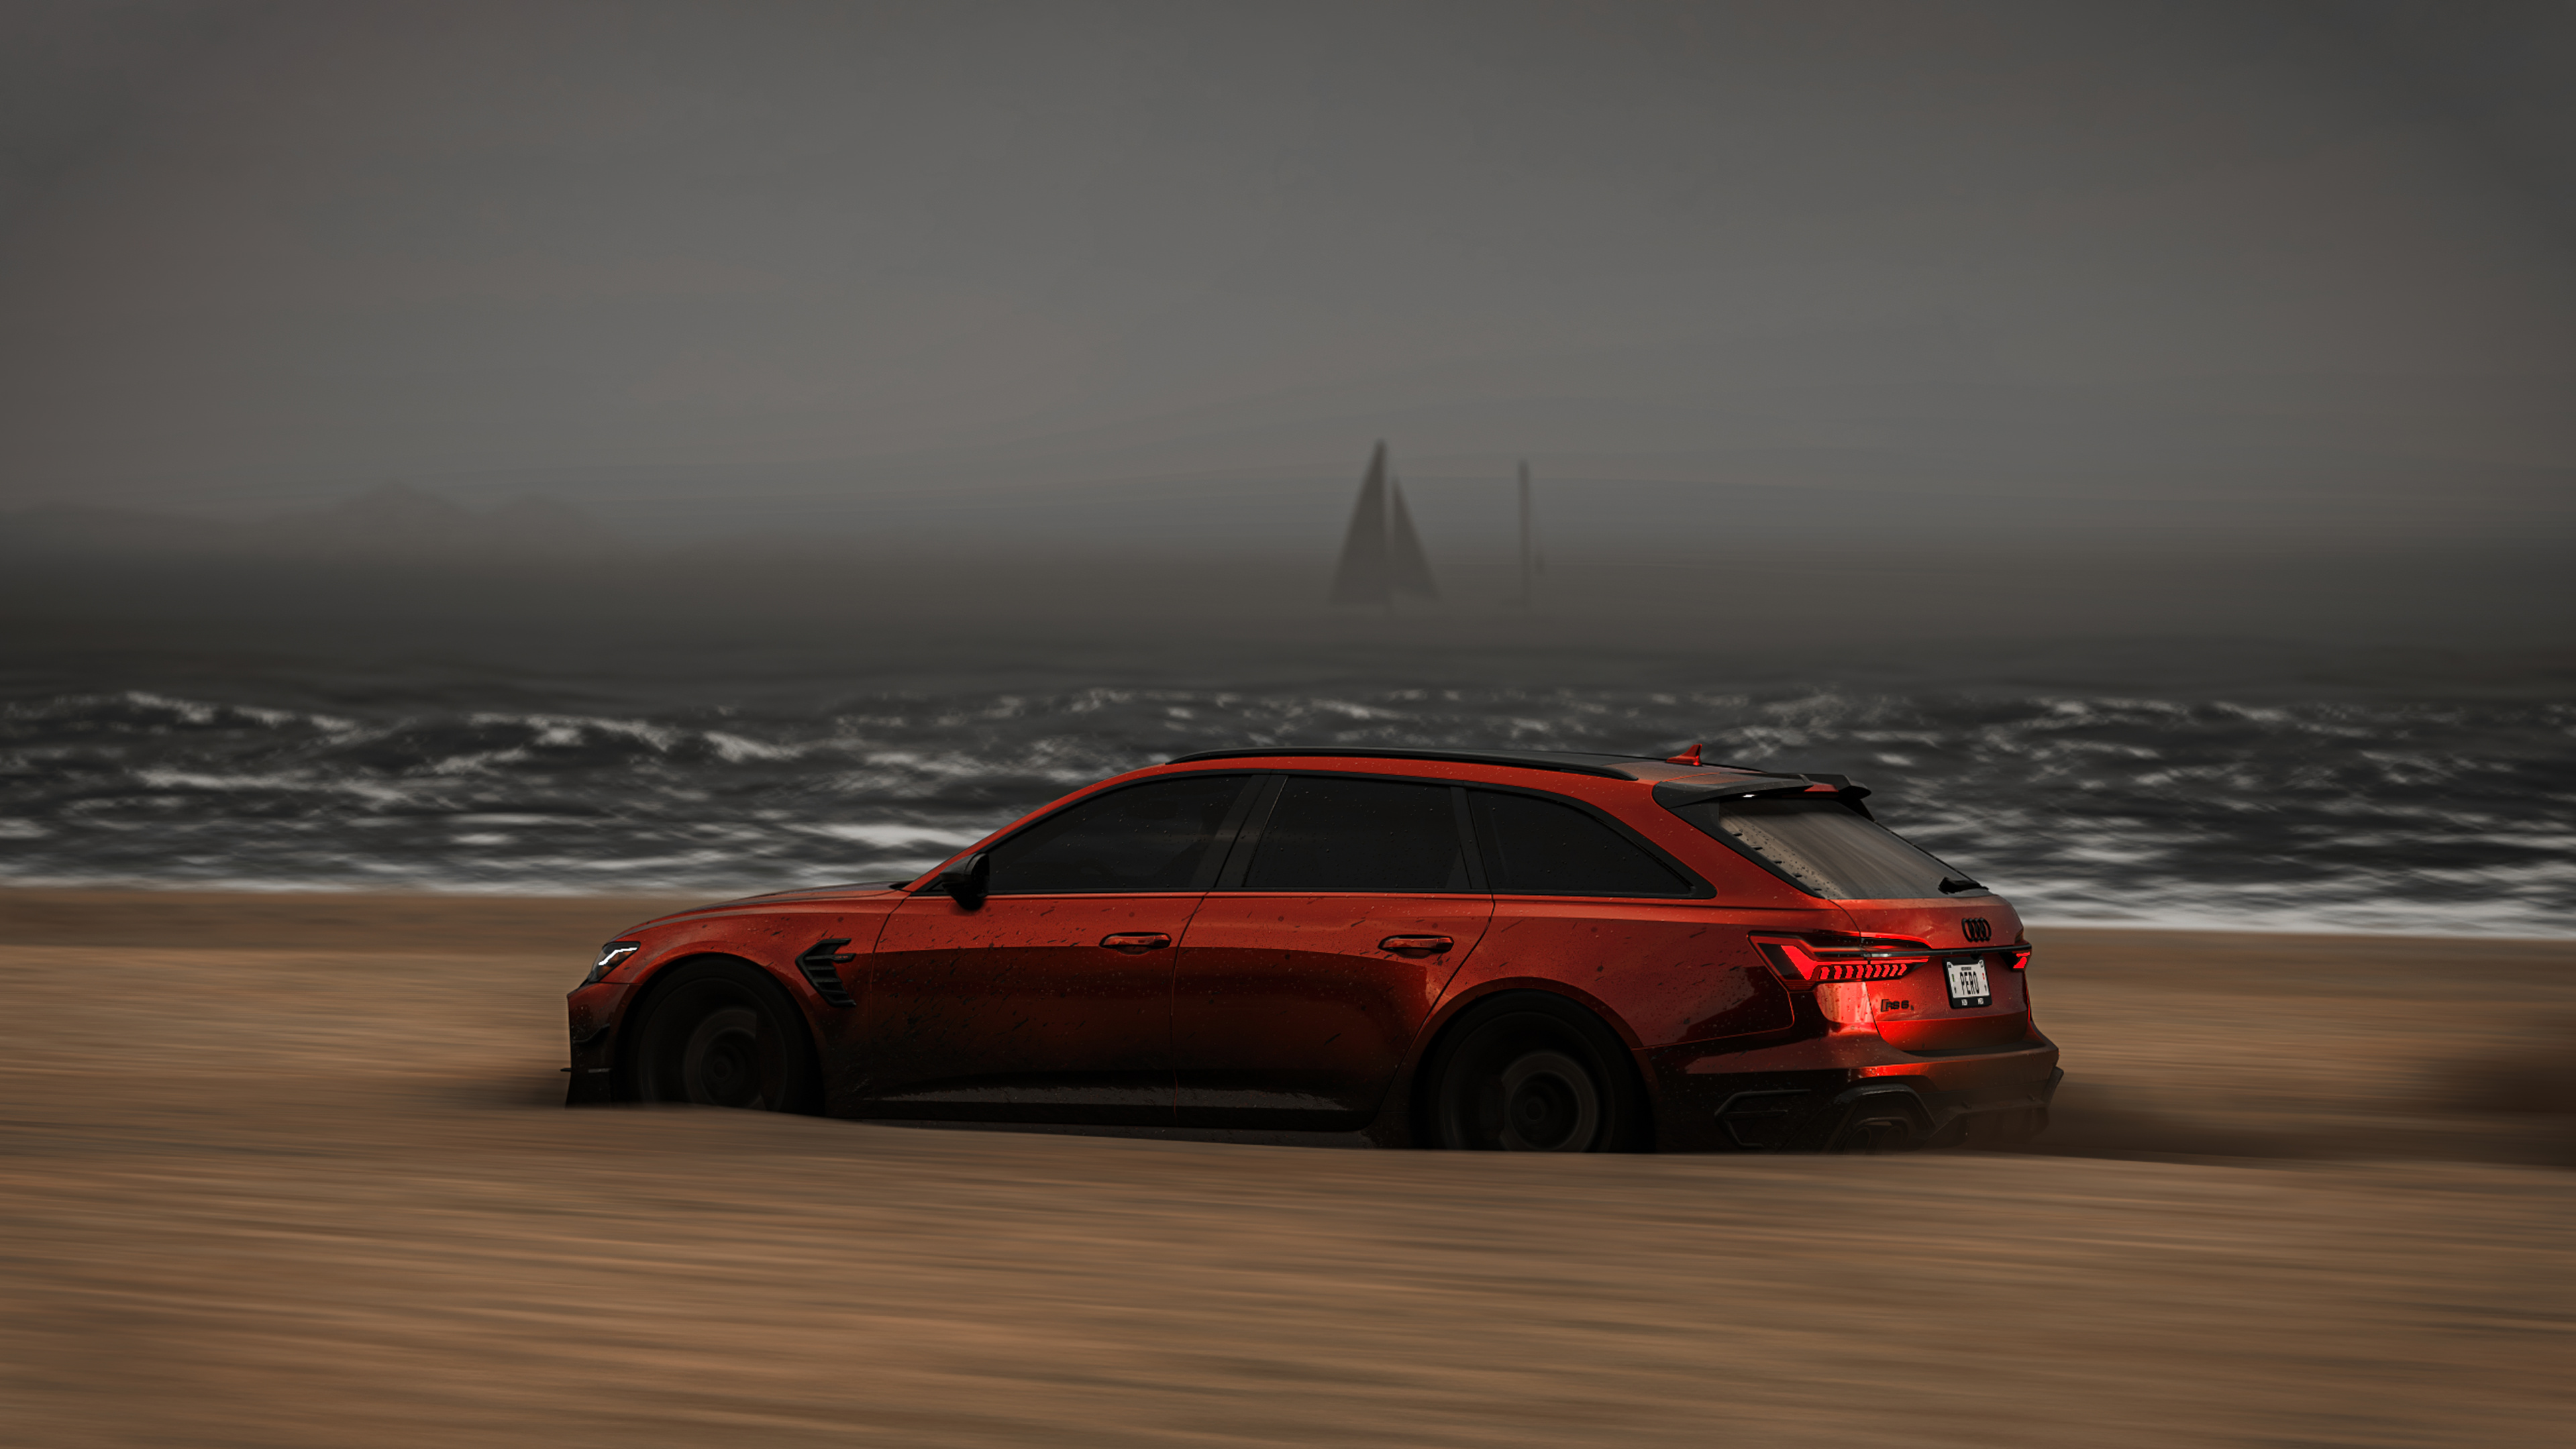 General 3839x2160 Audi audi rs Audi RS6 Avant video games vehicle car Forza Forza Horizon Forza Horizon 5 PlaygroundGames Turn 10 Studios Xbox side view taillights CGI licence plates sand water waves video game art